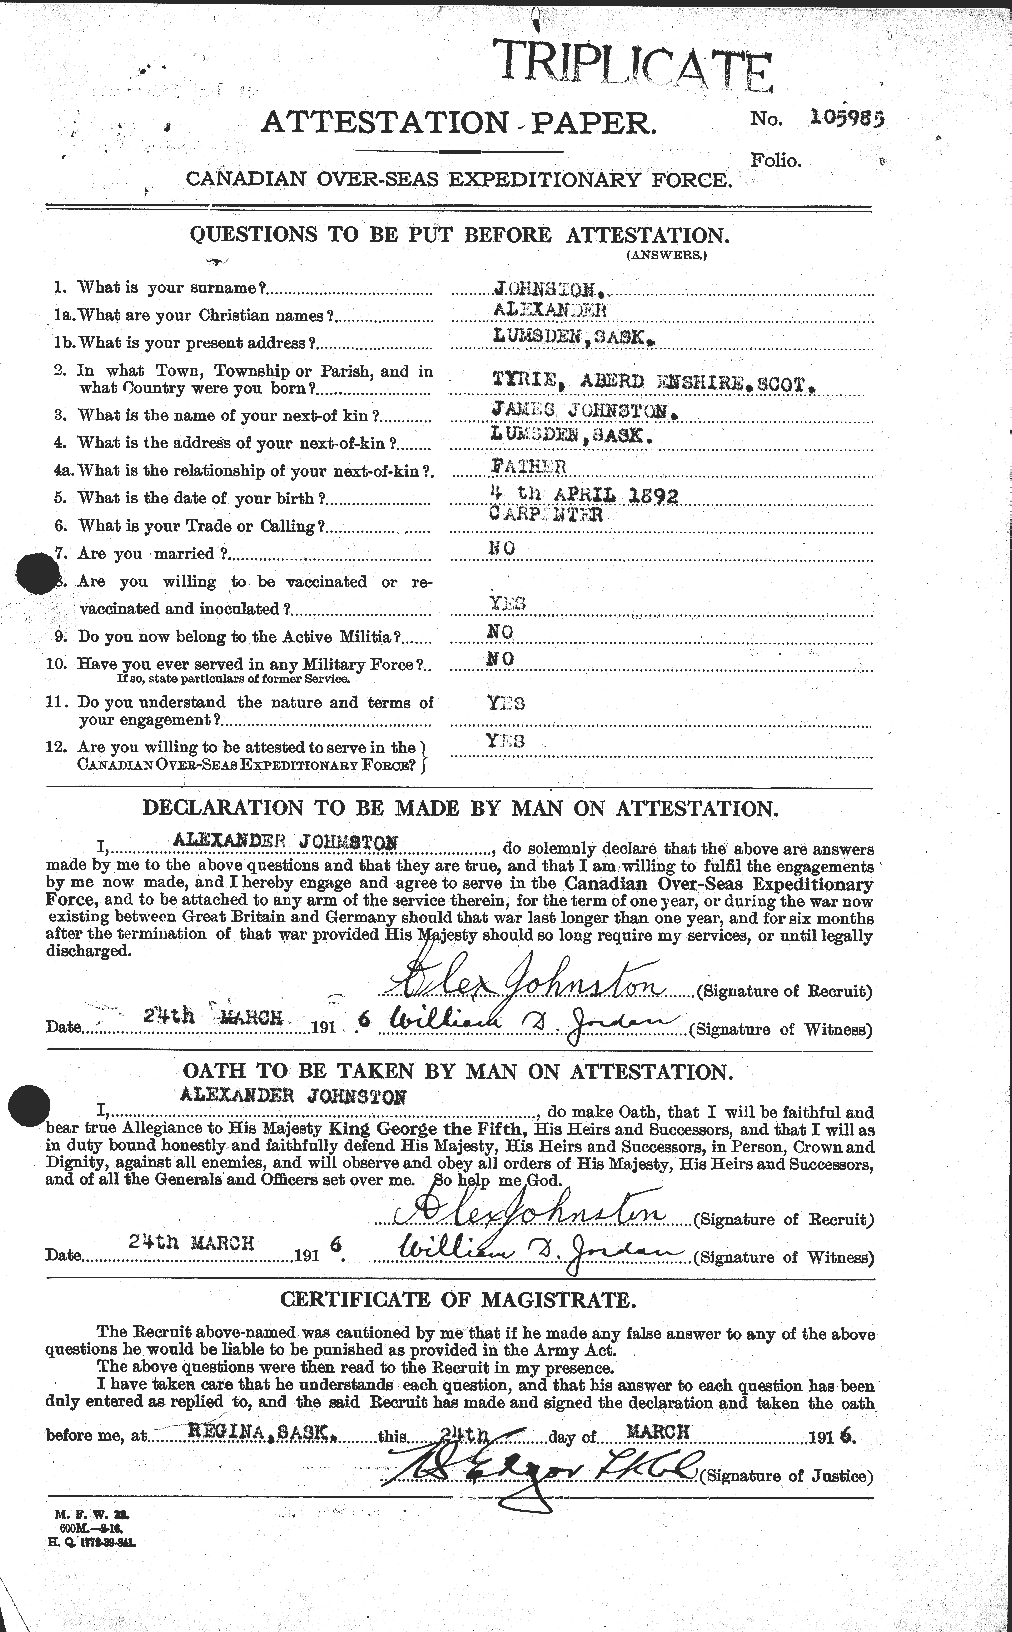 Personnel Records of the First World War - CEF 420955a